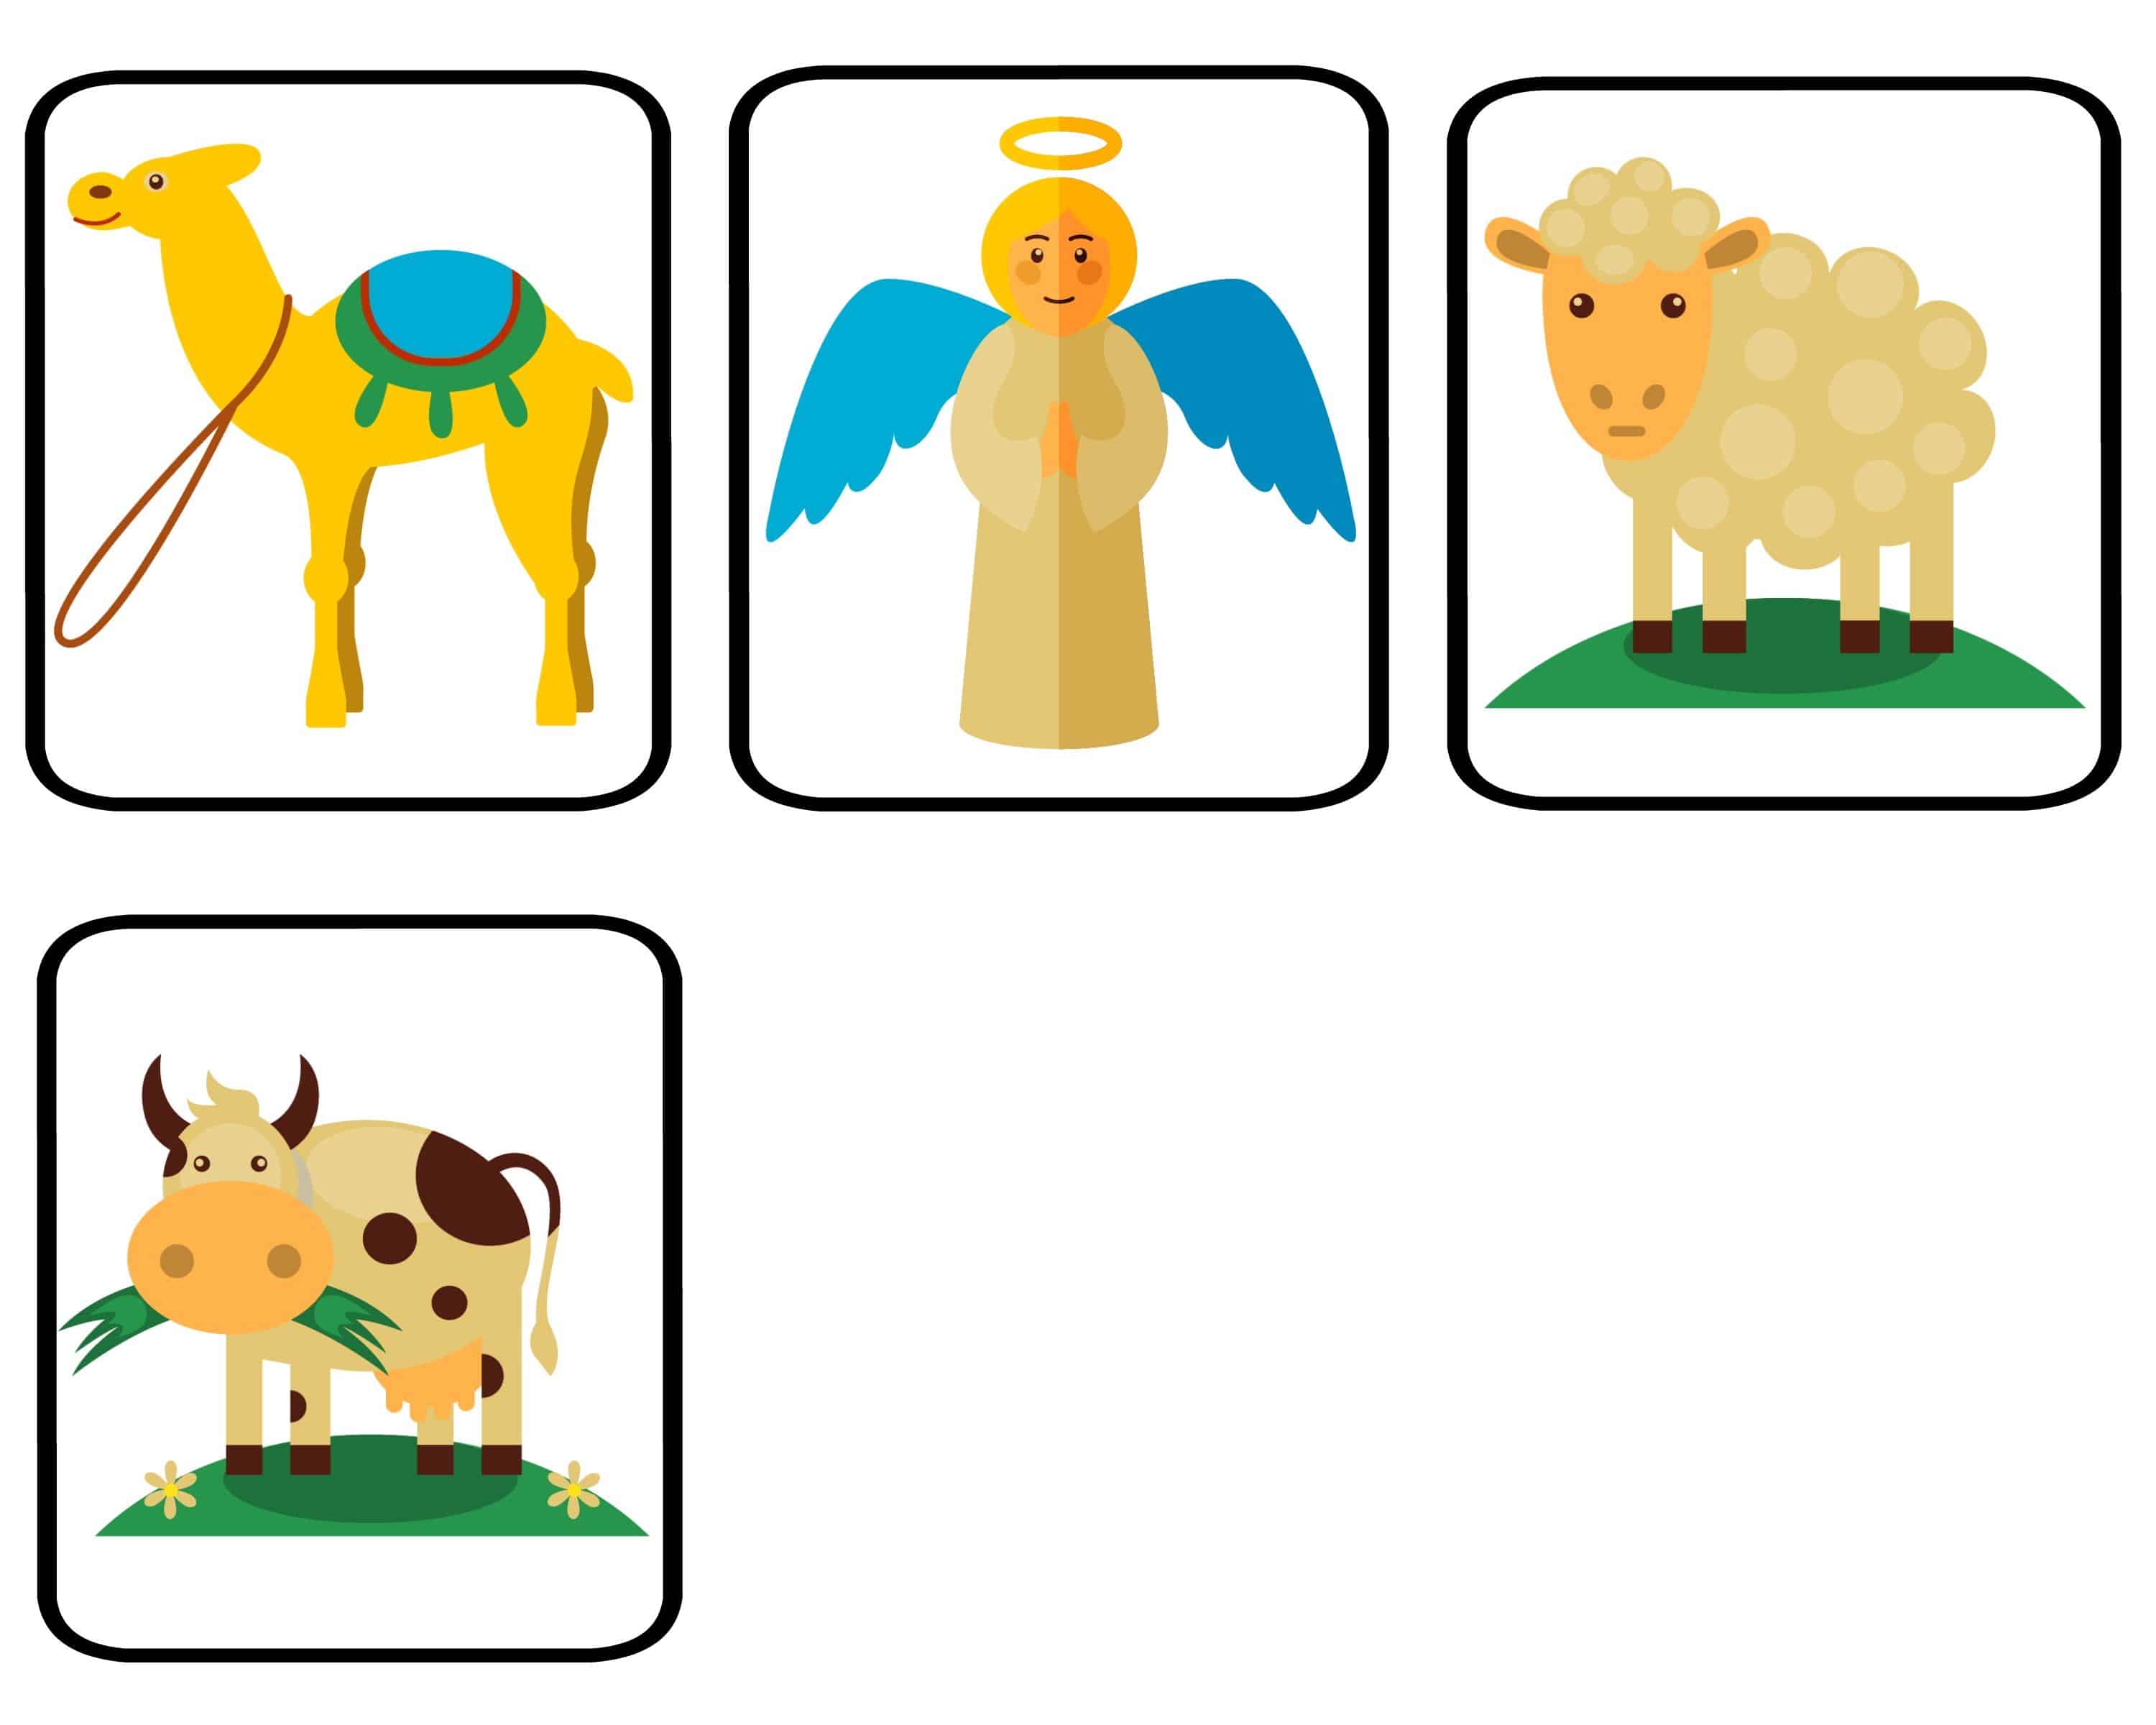 These nativity puppets are very easy to make and are perfect for dramatic play at home. Help kids learn and understand the The Nativity Story through play.